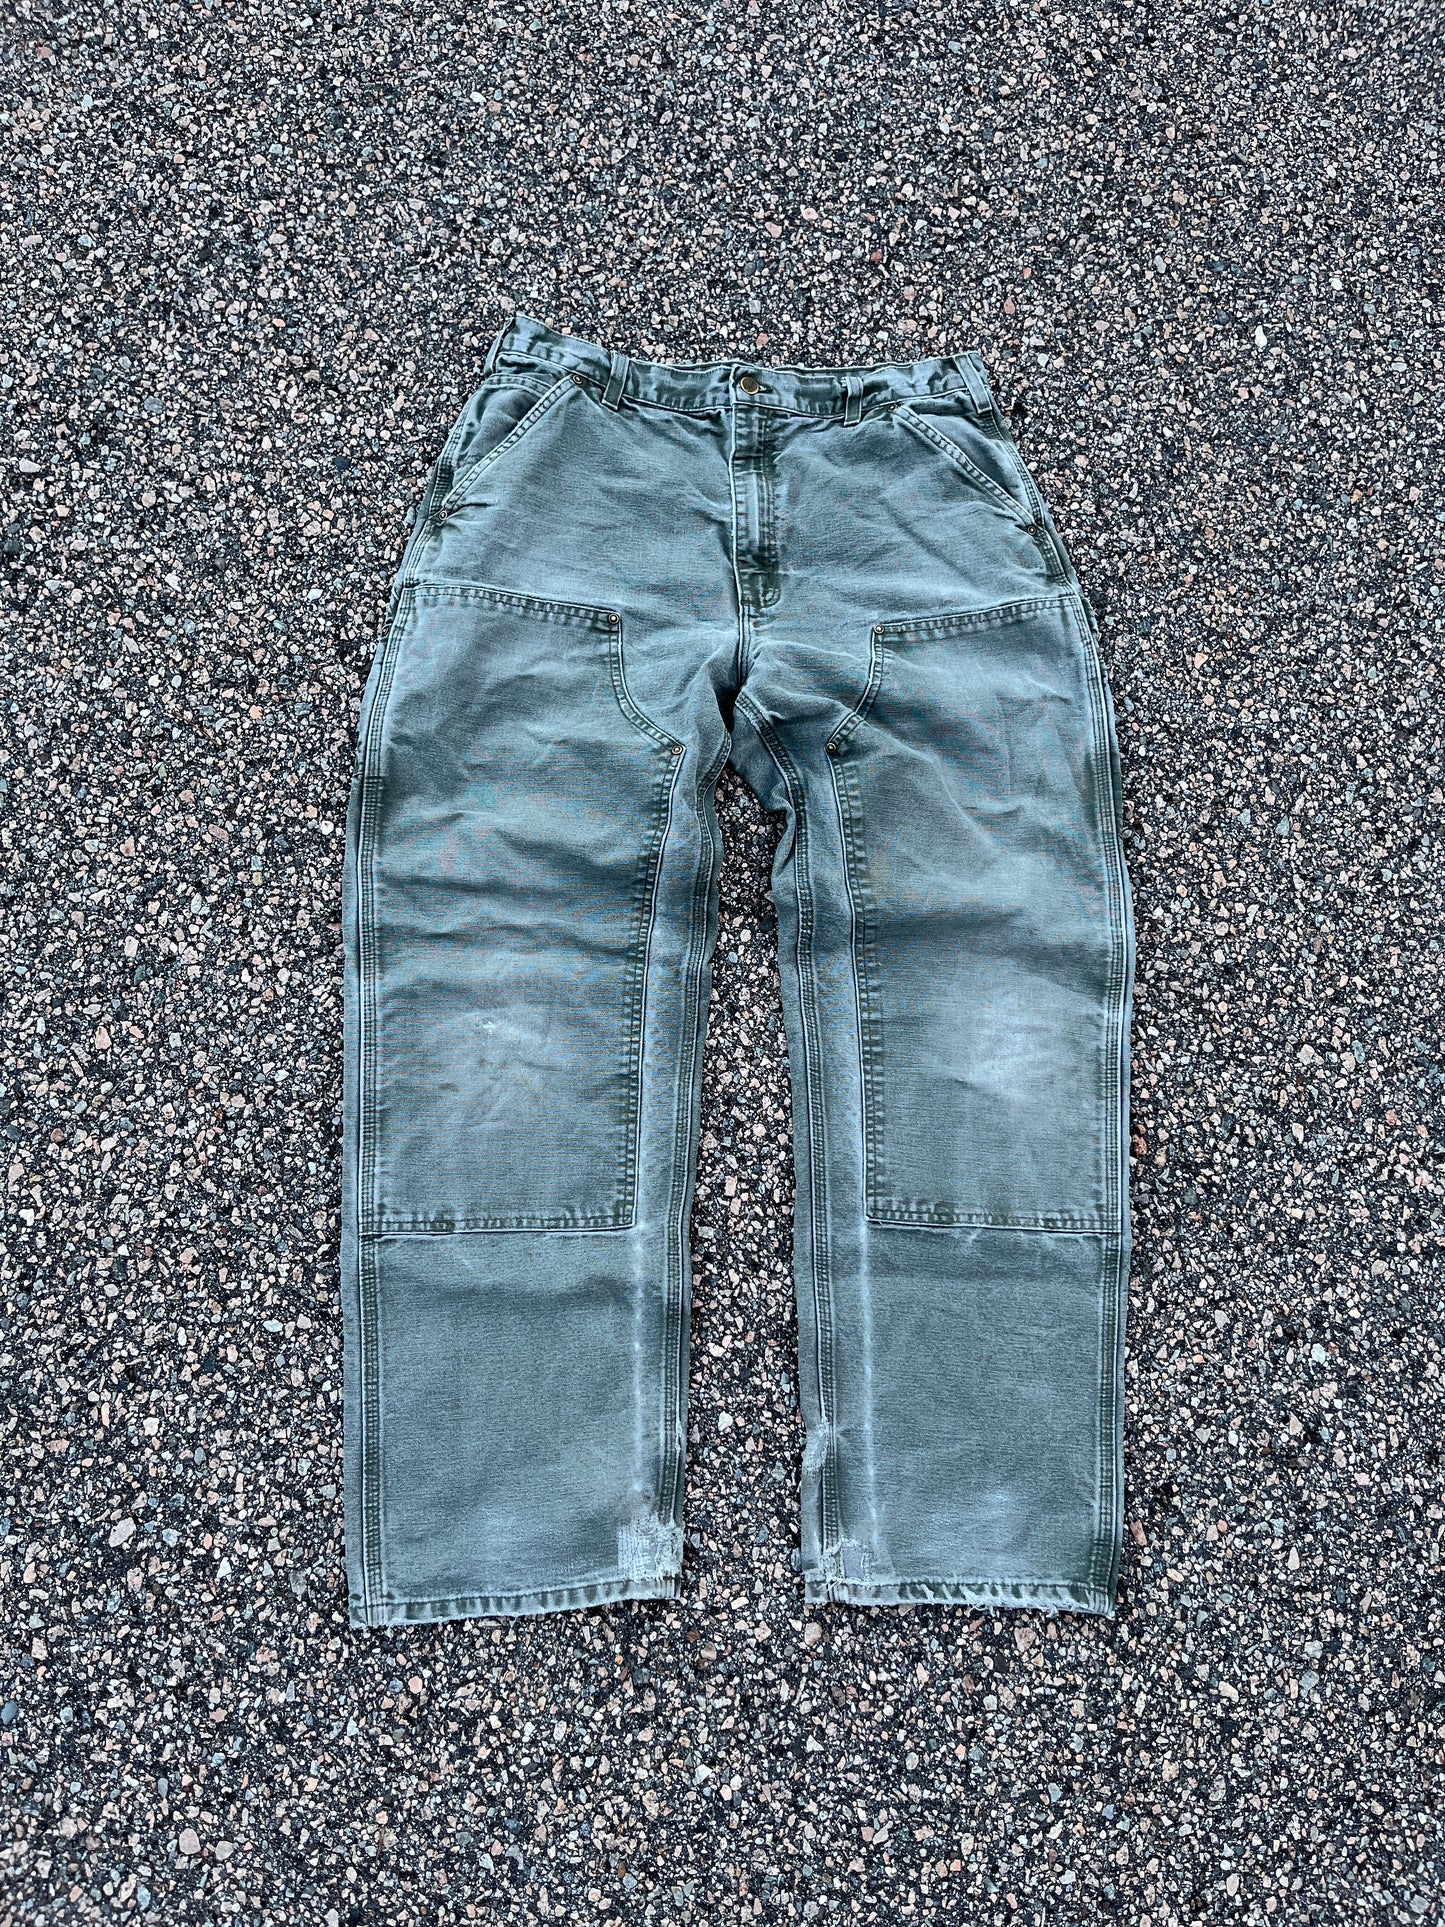 Faded Olive Green Carhartt Double Knee Pants - 34 x 30